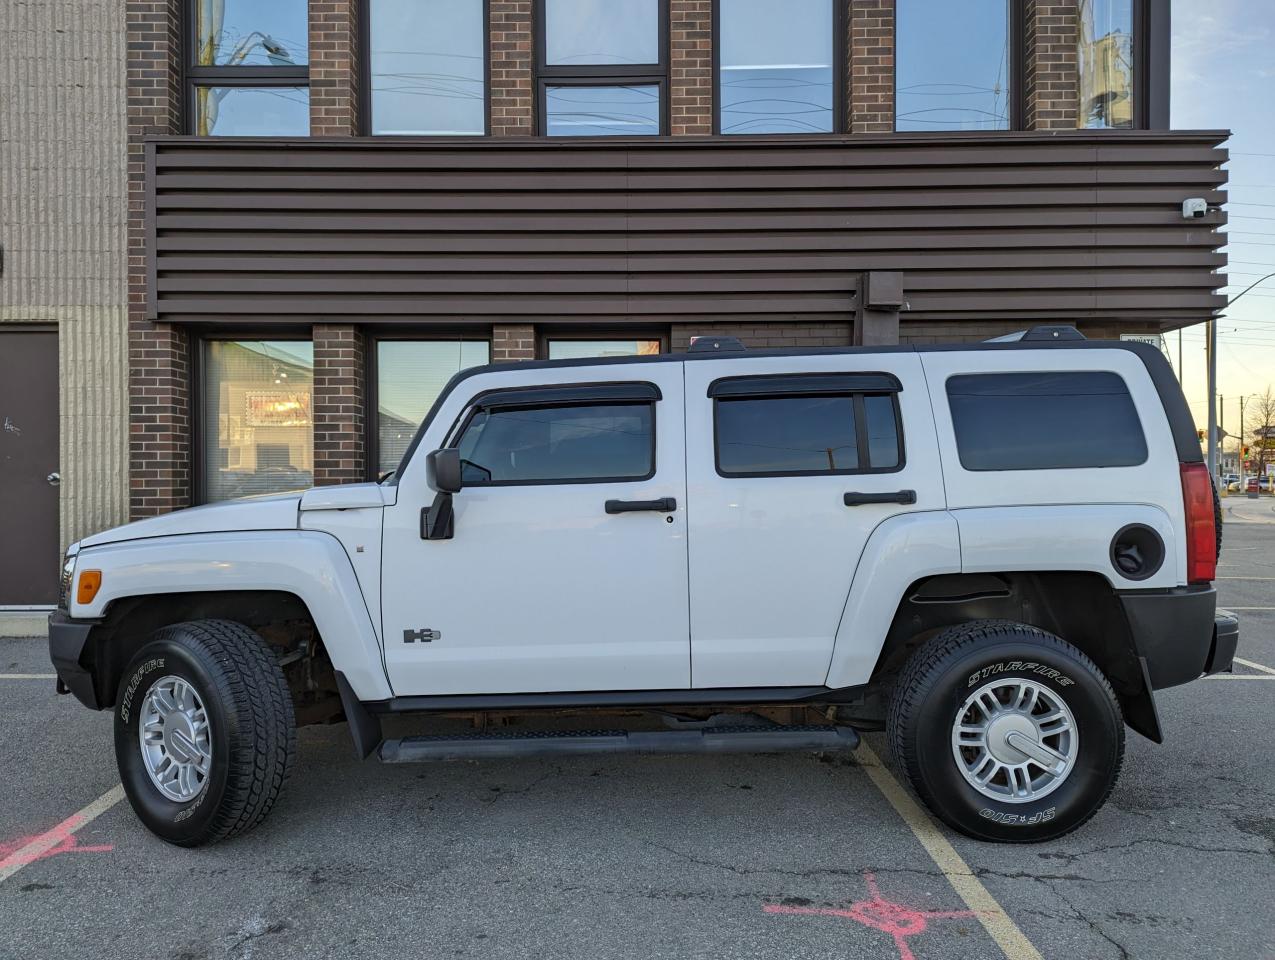 2008 Hummer H3 *Immaculate Condition/Drives Like New/Low kms* - Photo #5